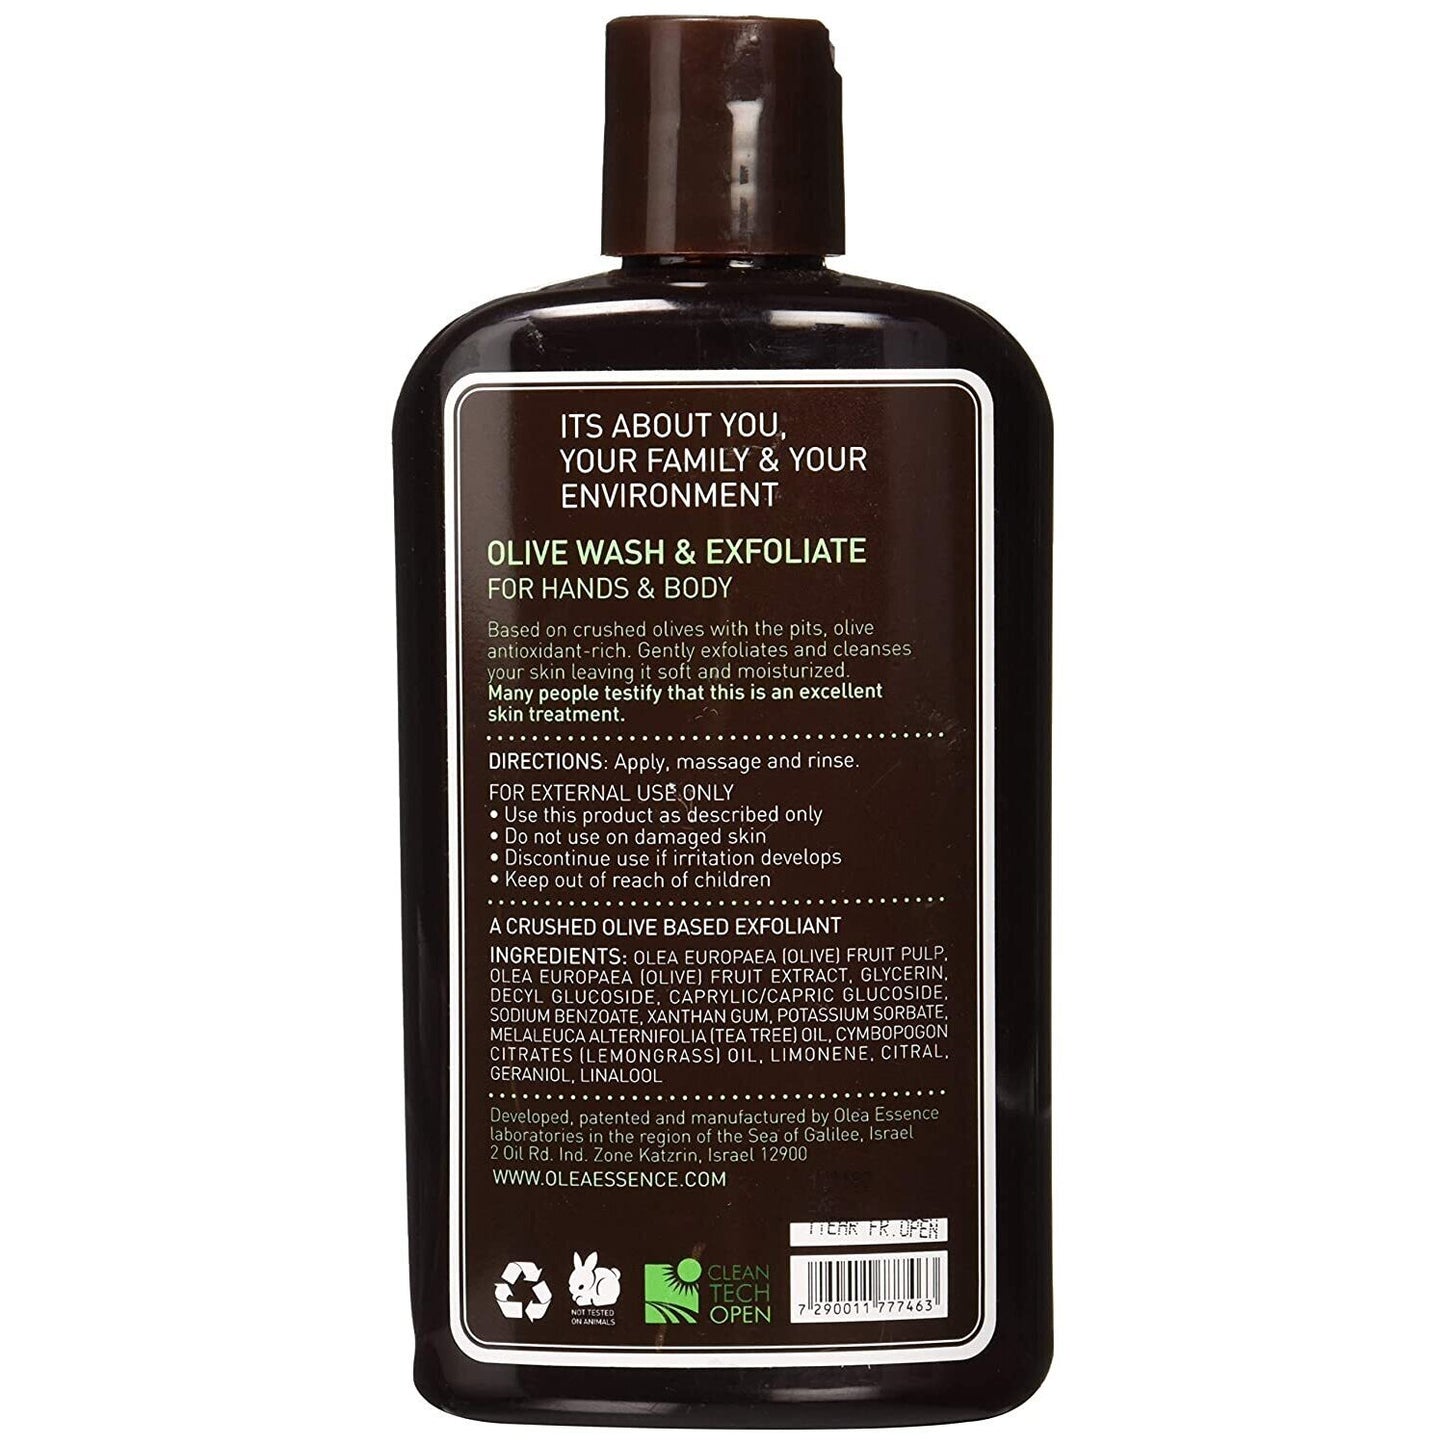 Olive Wash and Exfoliate for hands and body - Olea Essence - Israel Menu